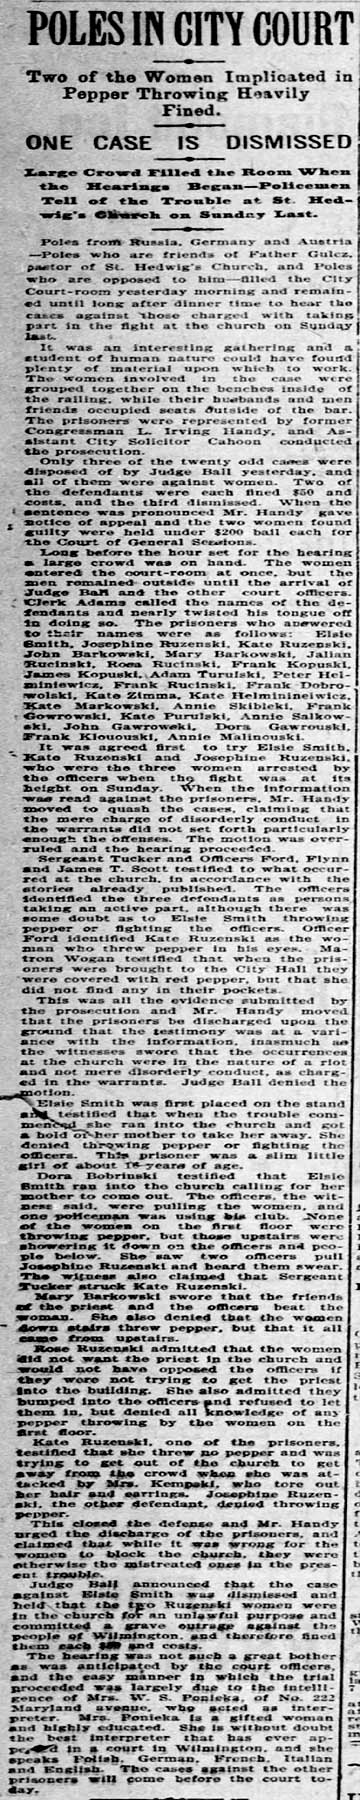 ST HEDWIGNS CHURCH POLISH WOMEN ATTACK COPS ARTICLE IN WILMINGTON DELAWARE AUGUST 1900 - B